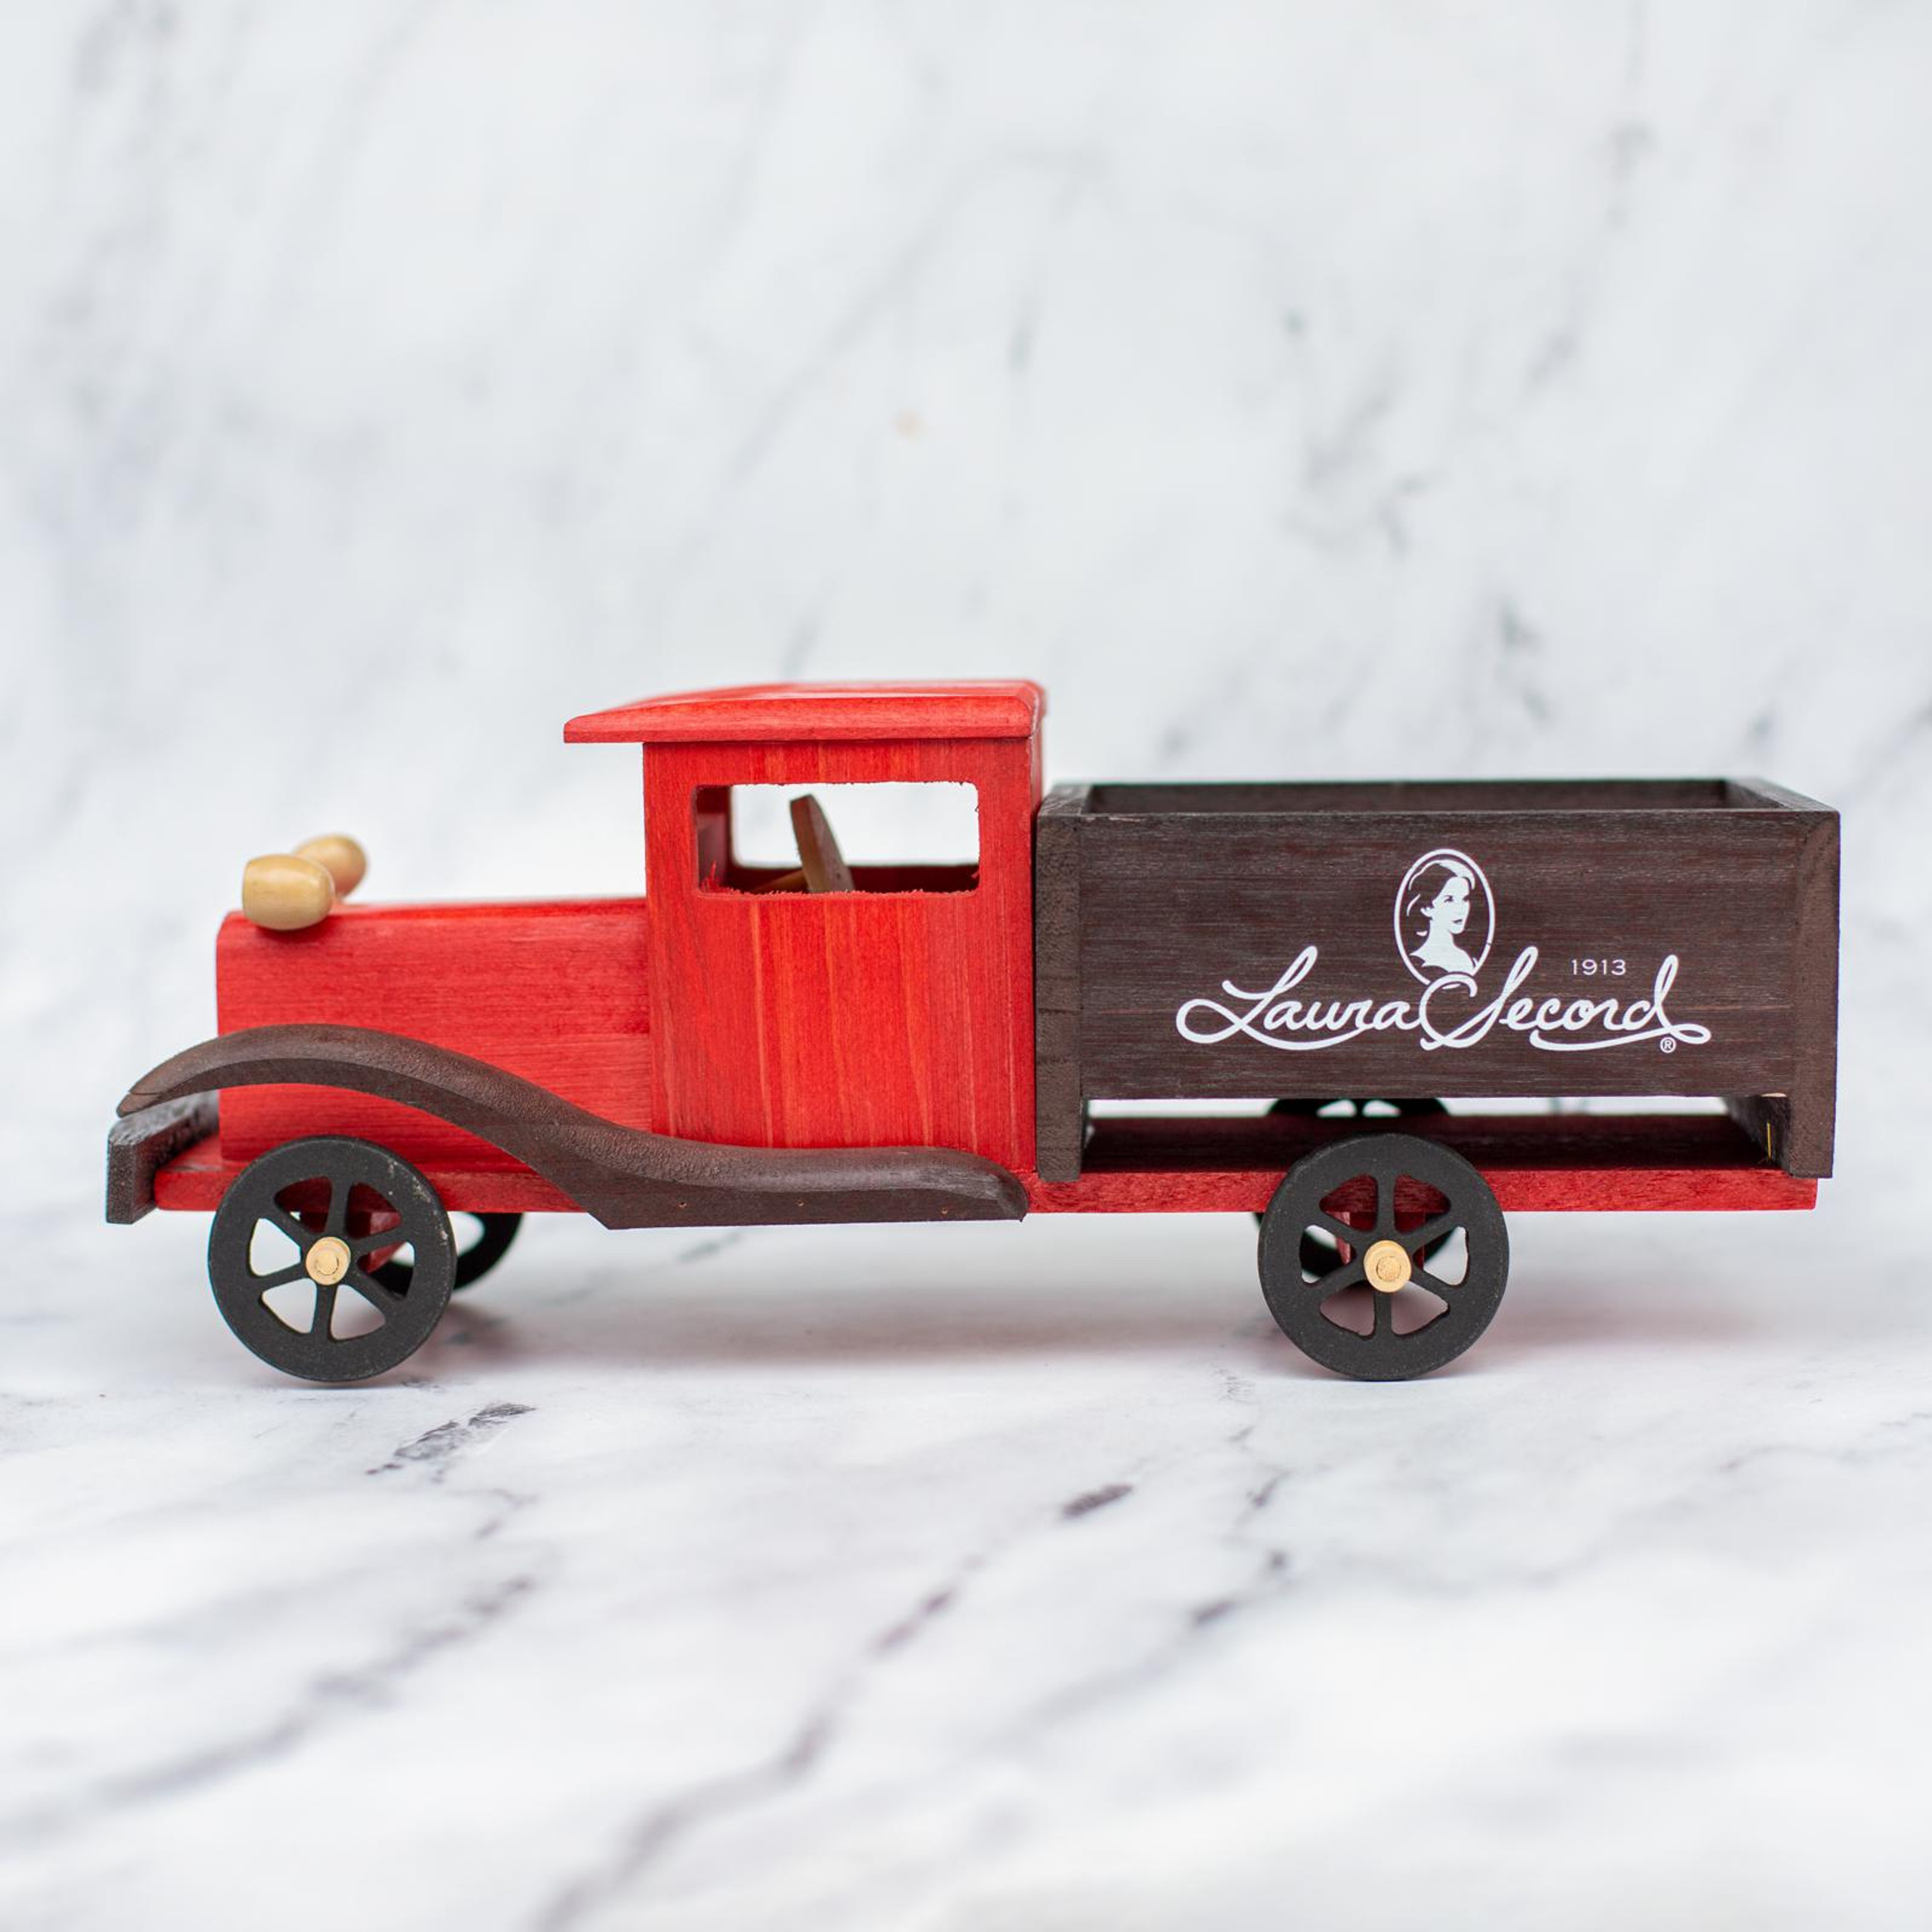 Vintage Laura Secord Wooden Truck [86646]